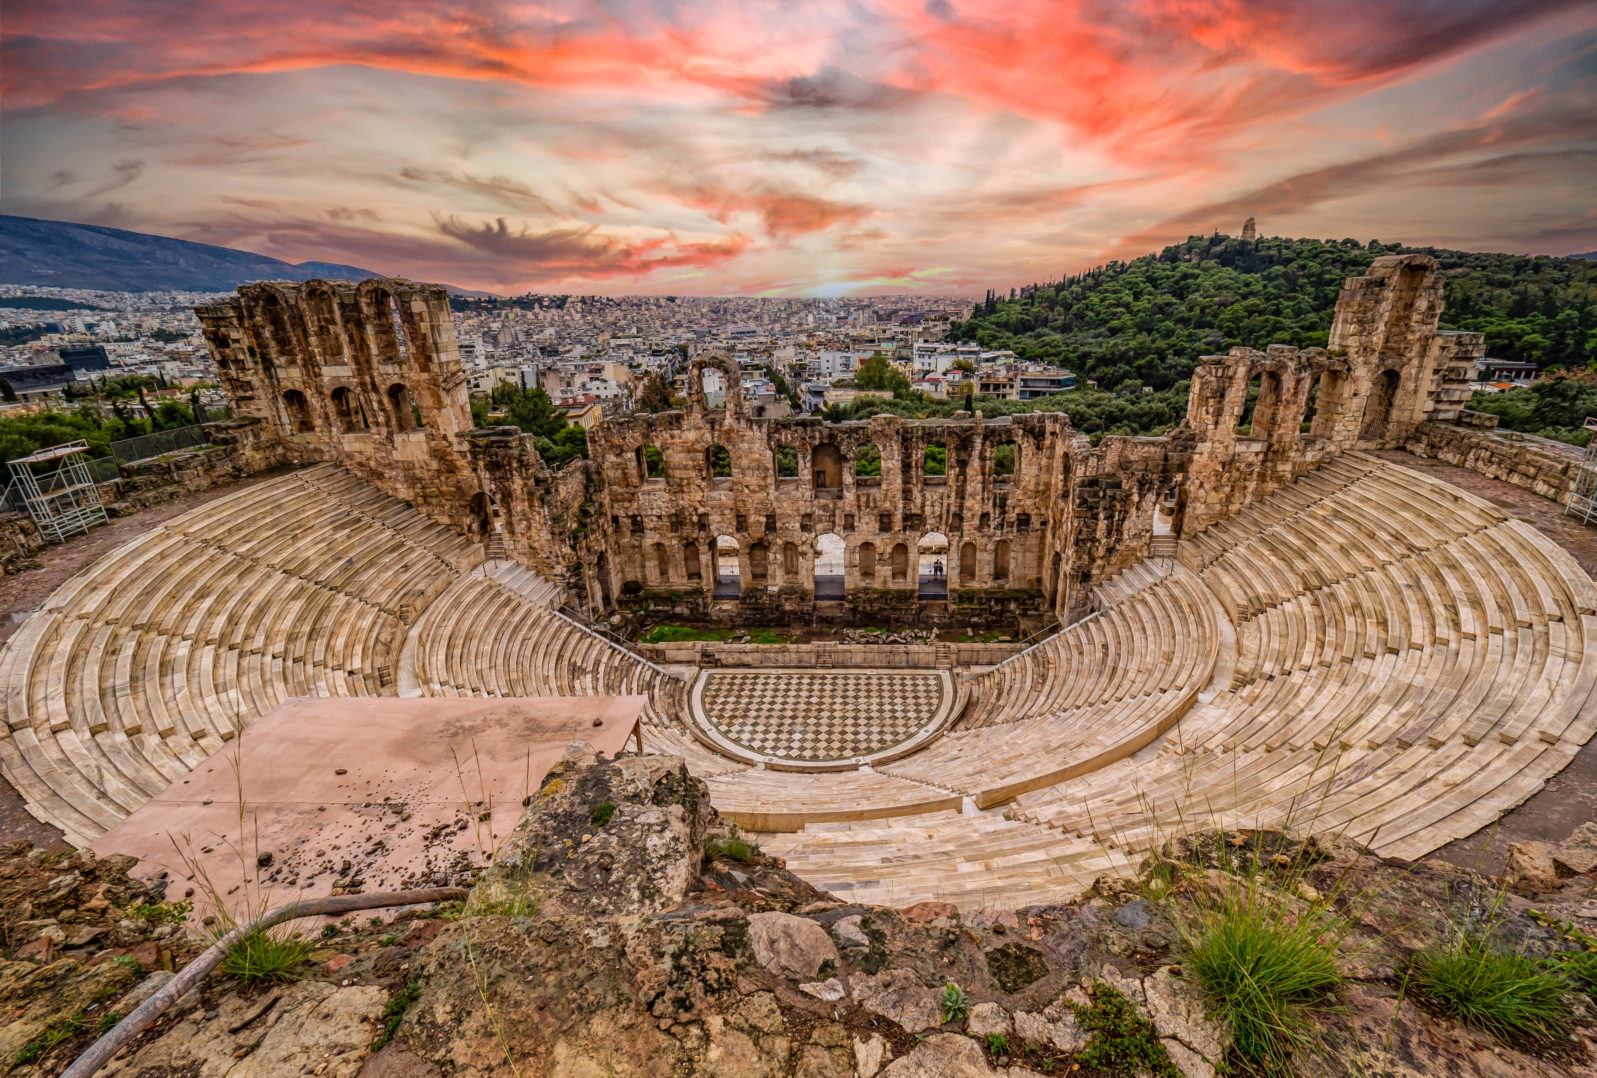 Athens Odeon theatre in the acropolis